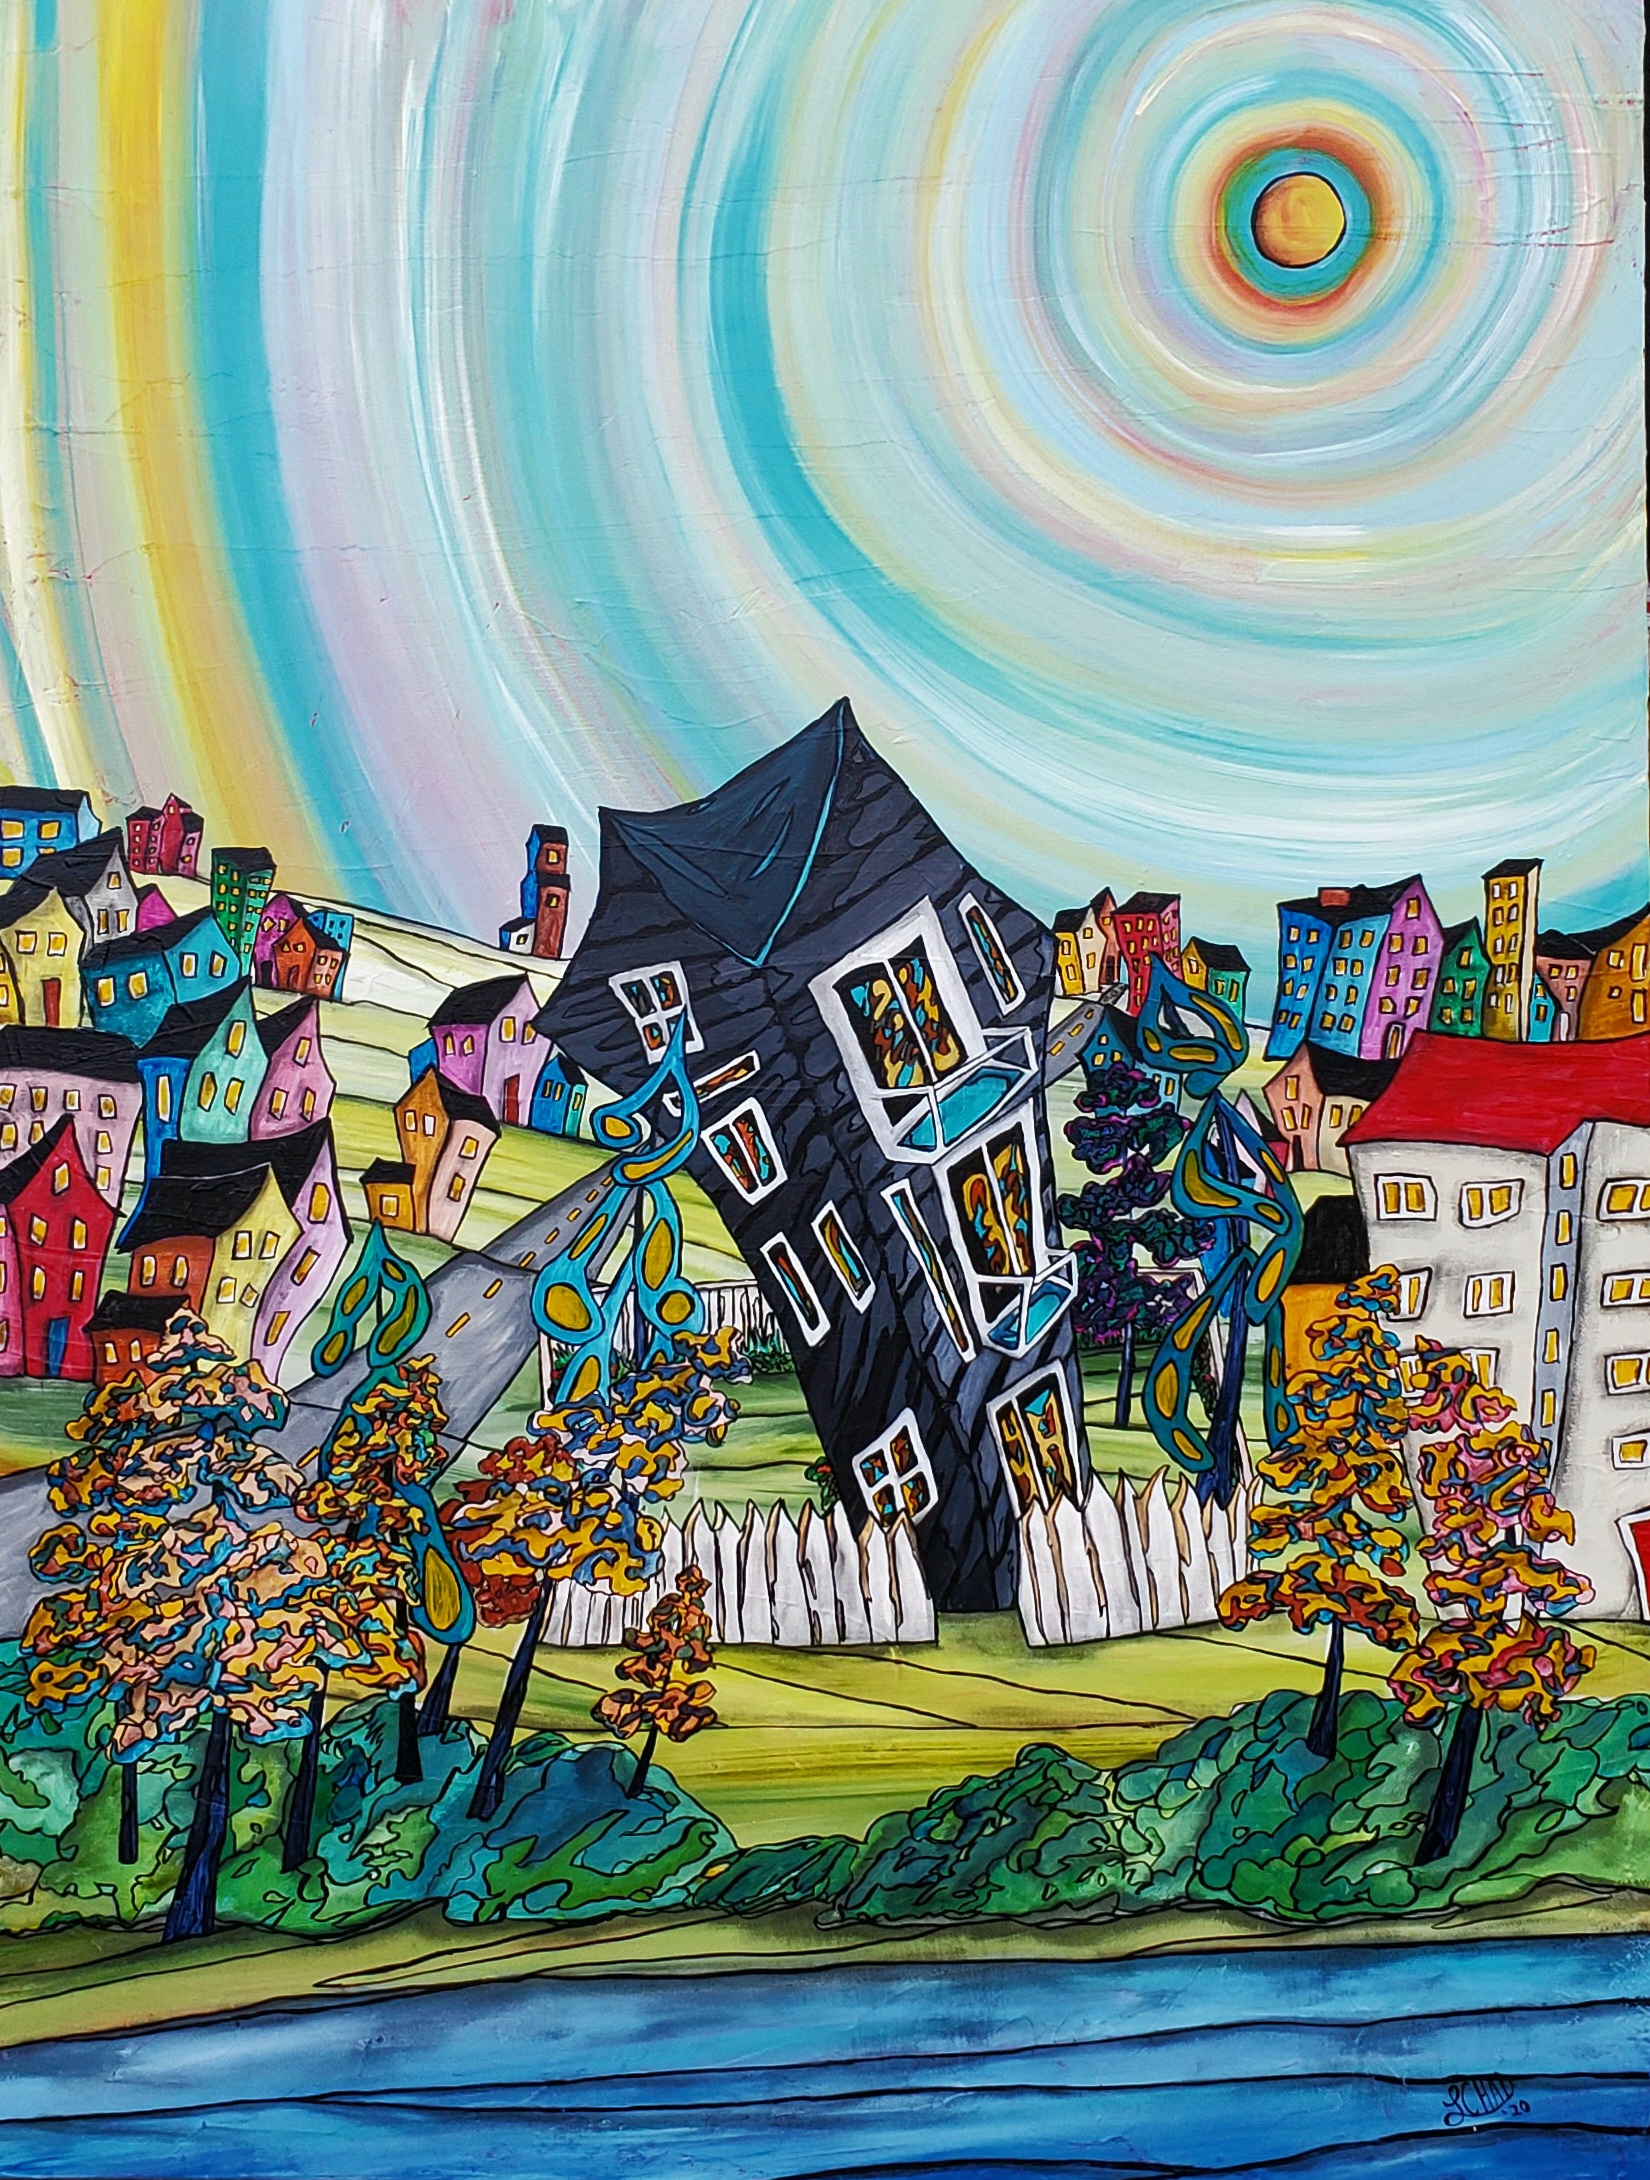 "My White Picket Fence" [2020]
Image: 35" x 35"
Mixed Media on Professional Canvas
SOLD